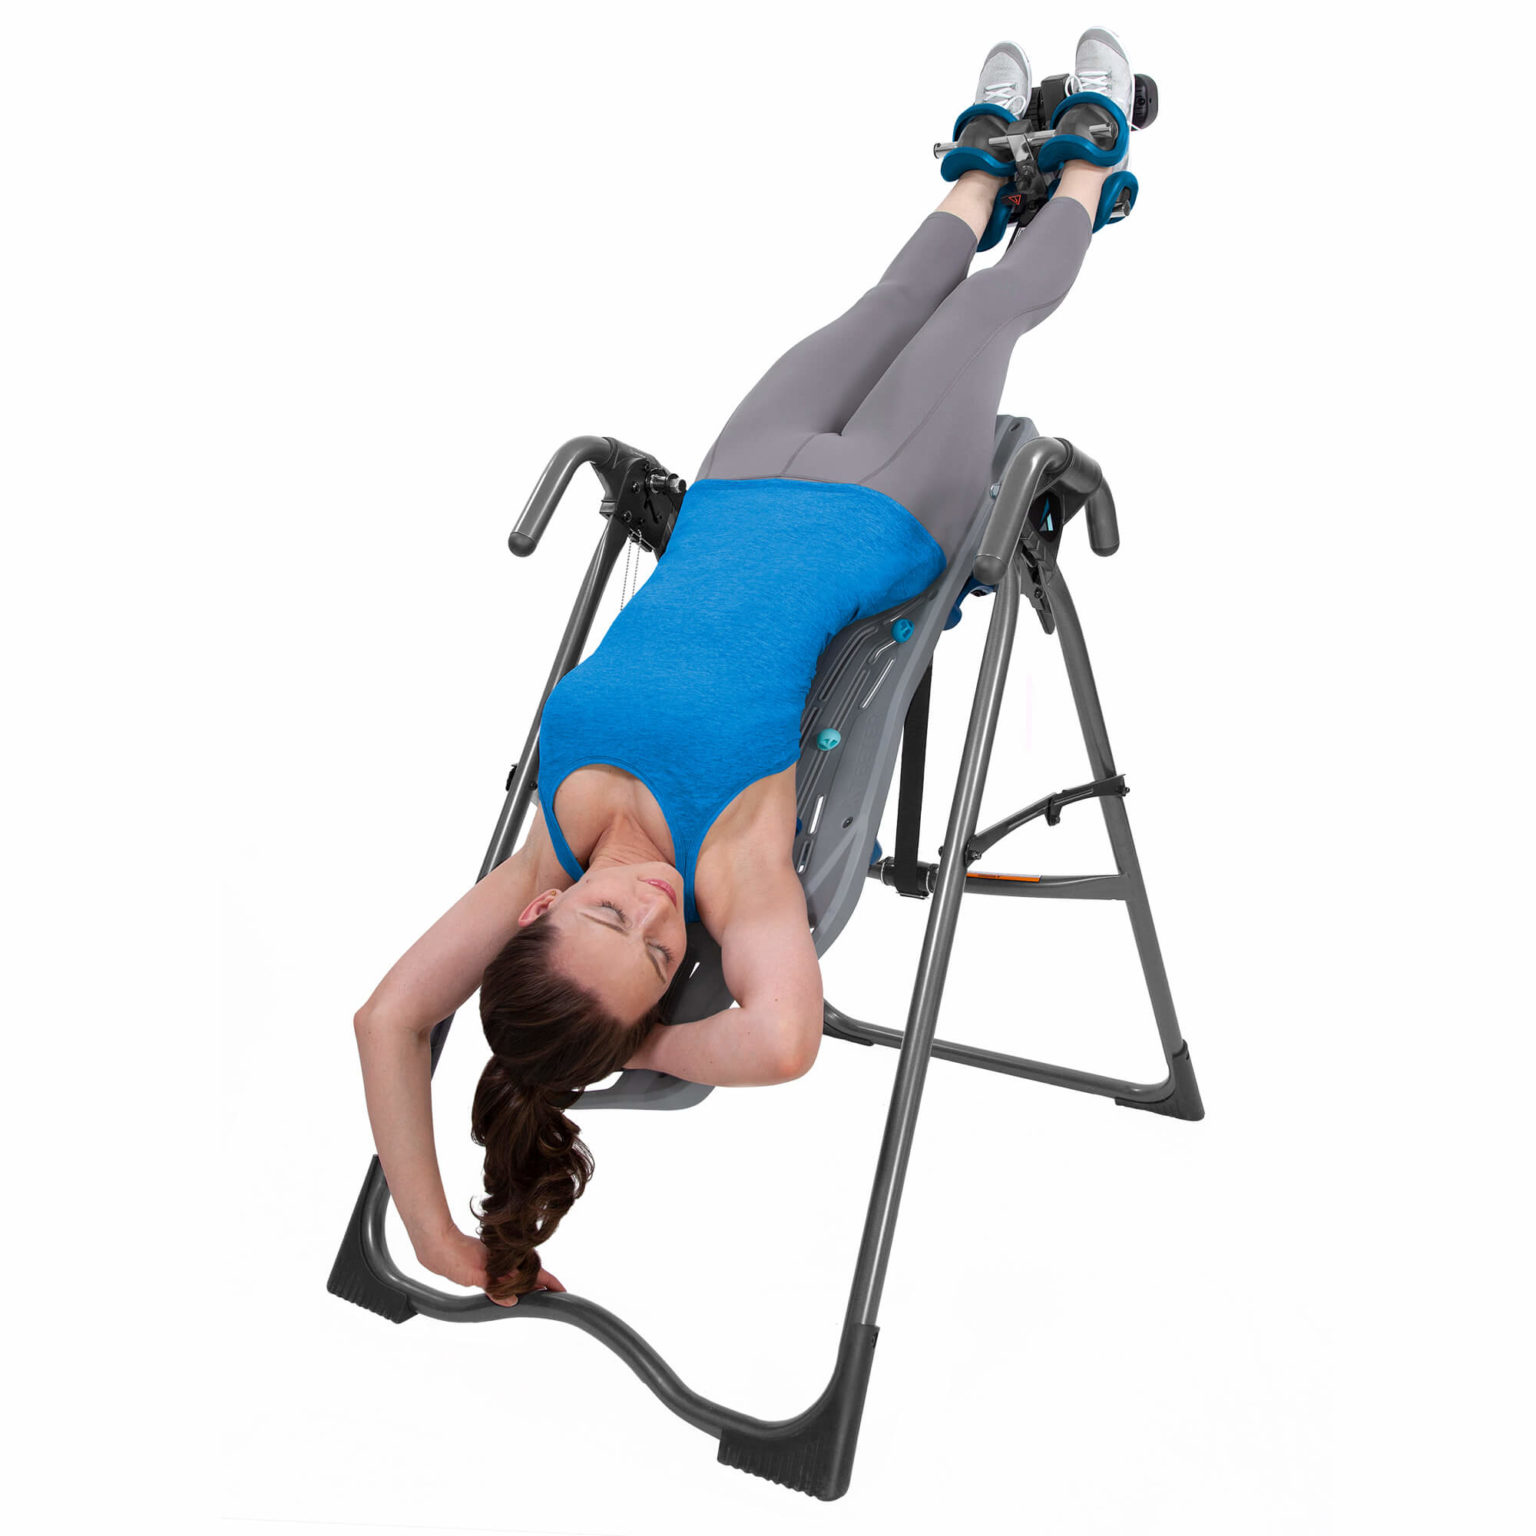 Teeter Fitspine X1 Inversion Table Teeter Hang Ups Inversion Tables